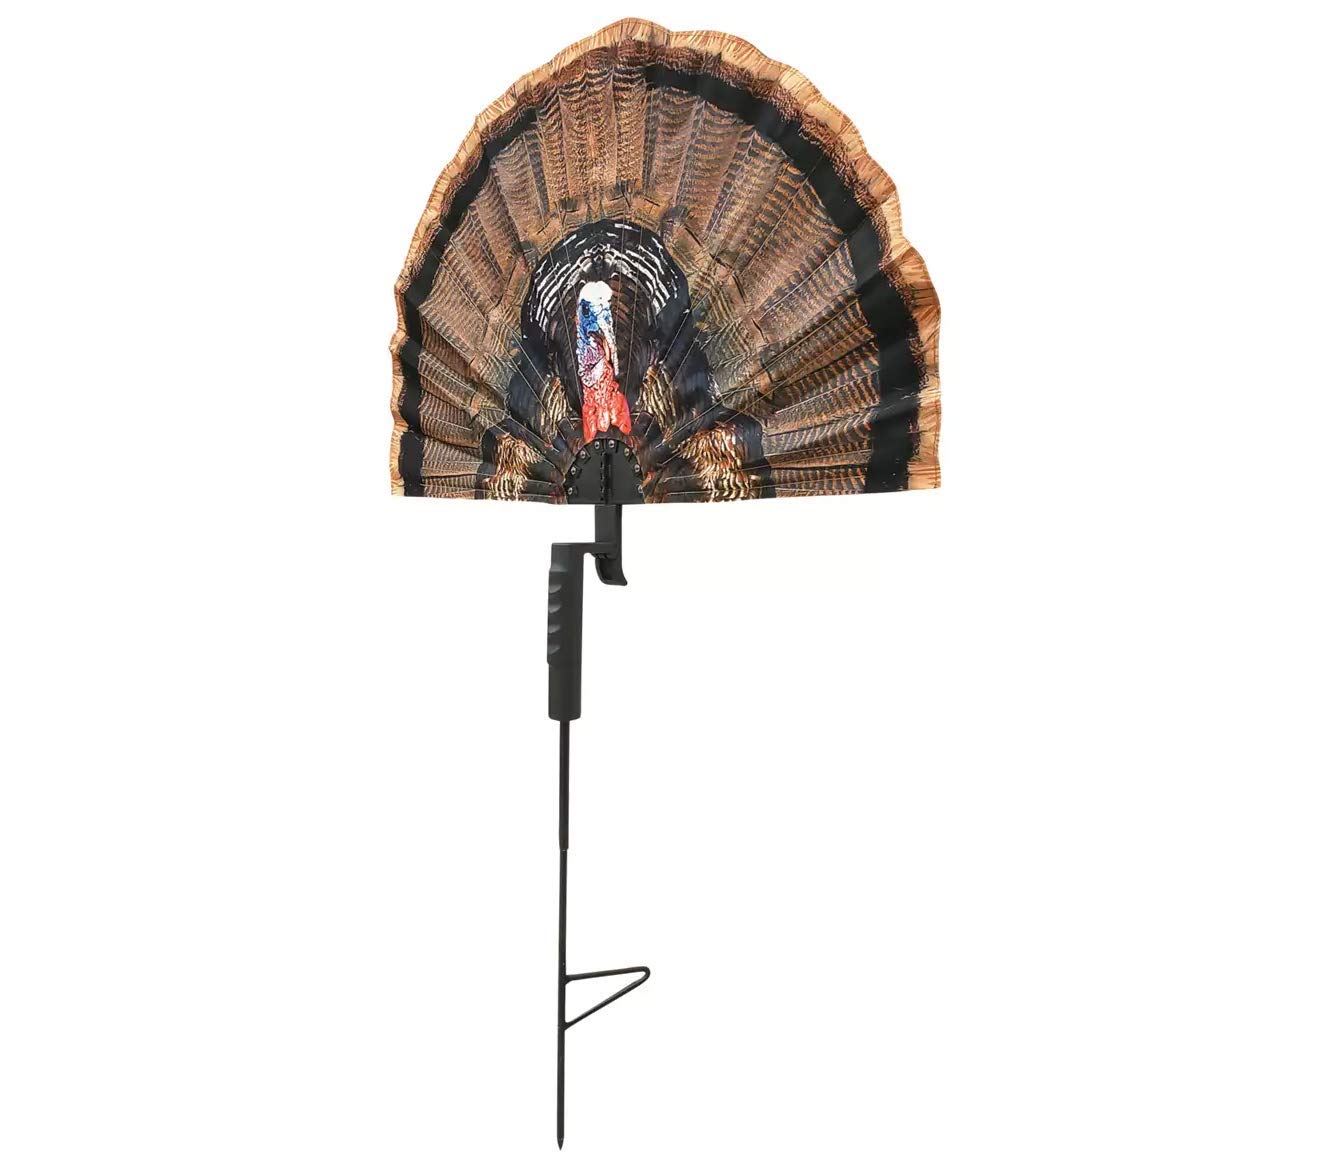 MOJO Outdoors Fatal Fan Turkey Hunting Decoy, Realistic Artificial Fan with Photo Head Mounted Stake, Turkey Hunting Gear and Accessories